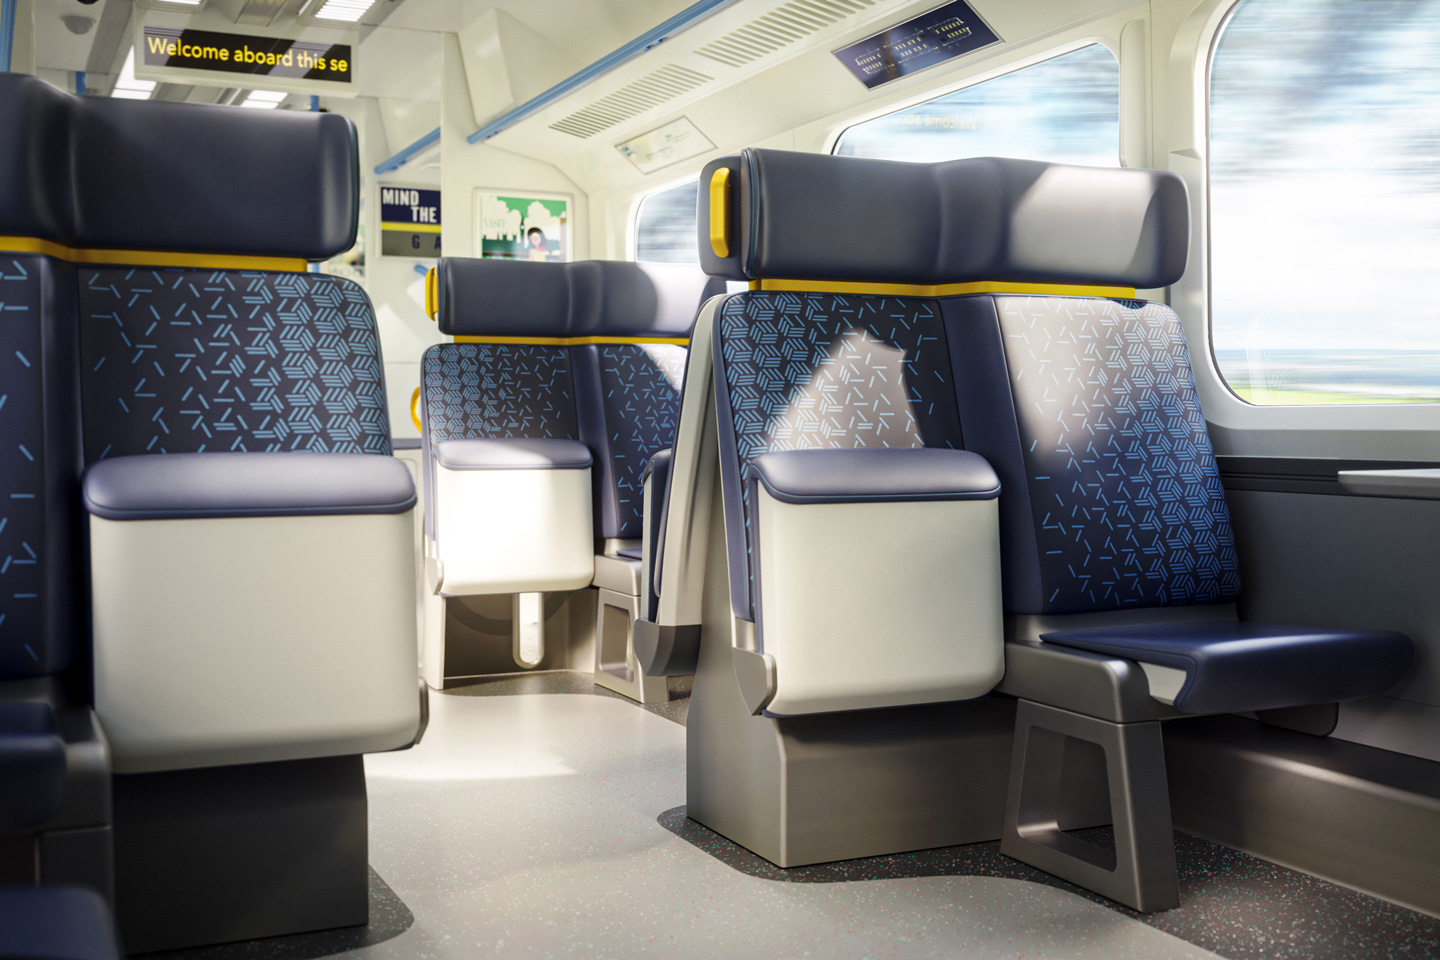 #The Proteus Rail Interior System by PriestmanGoode brings airline-level flexibility and comfort to trains